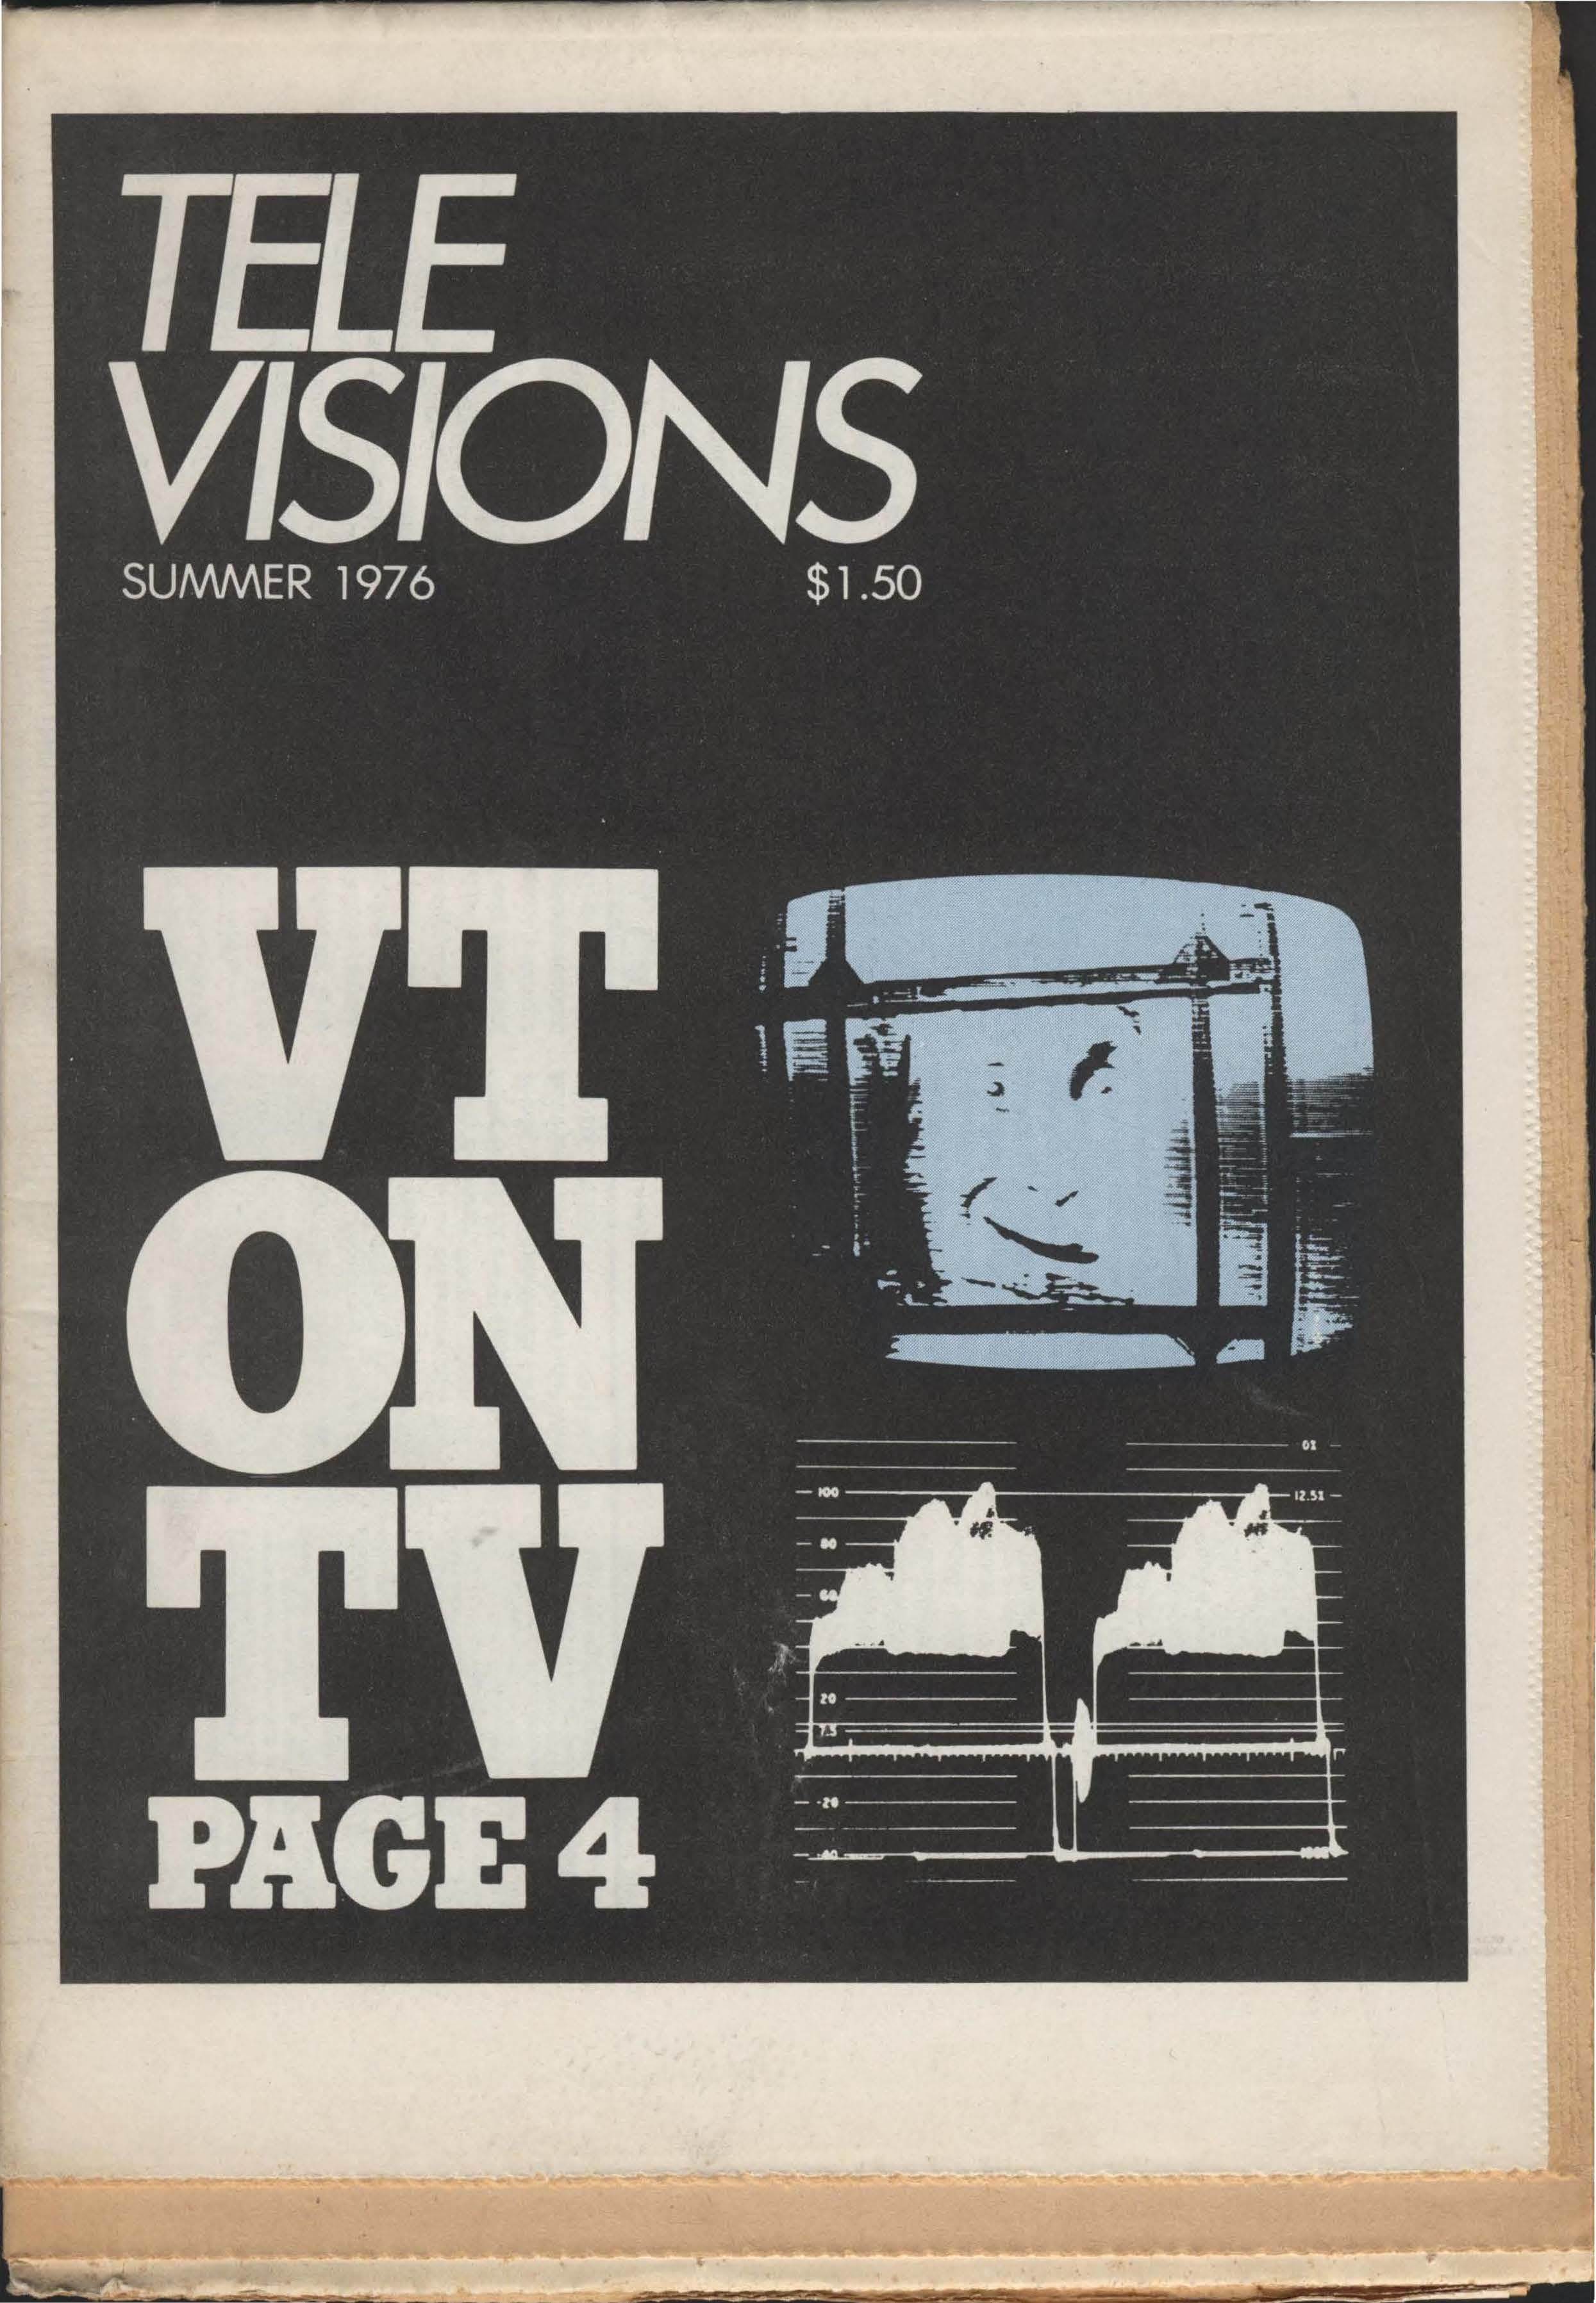 TeleVisions Magazine Larry Kirkman Editor National Endowment for the Arts